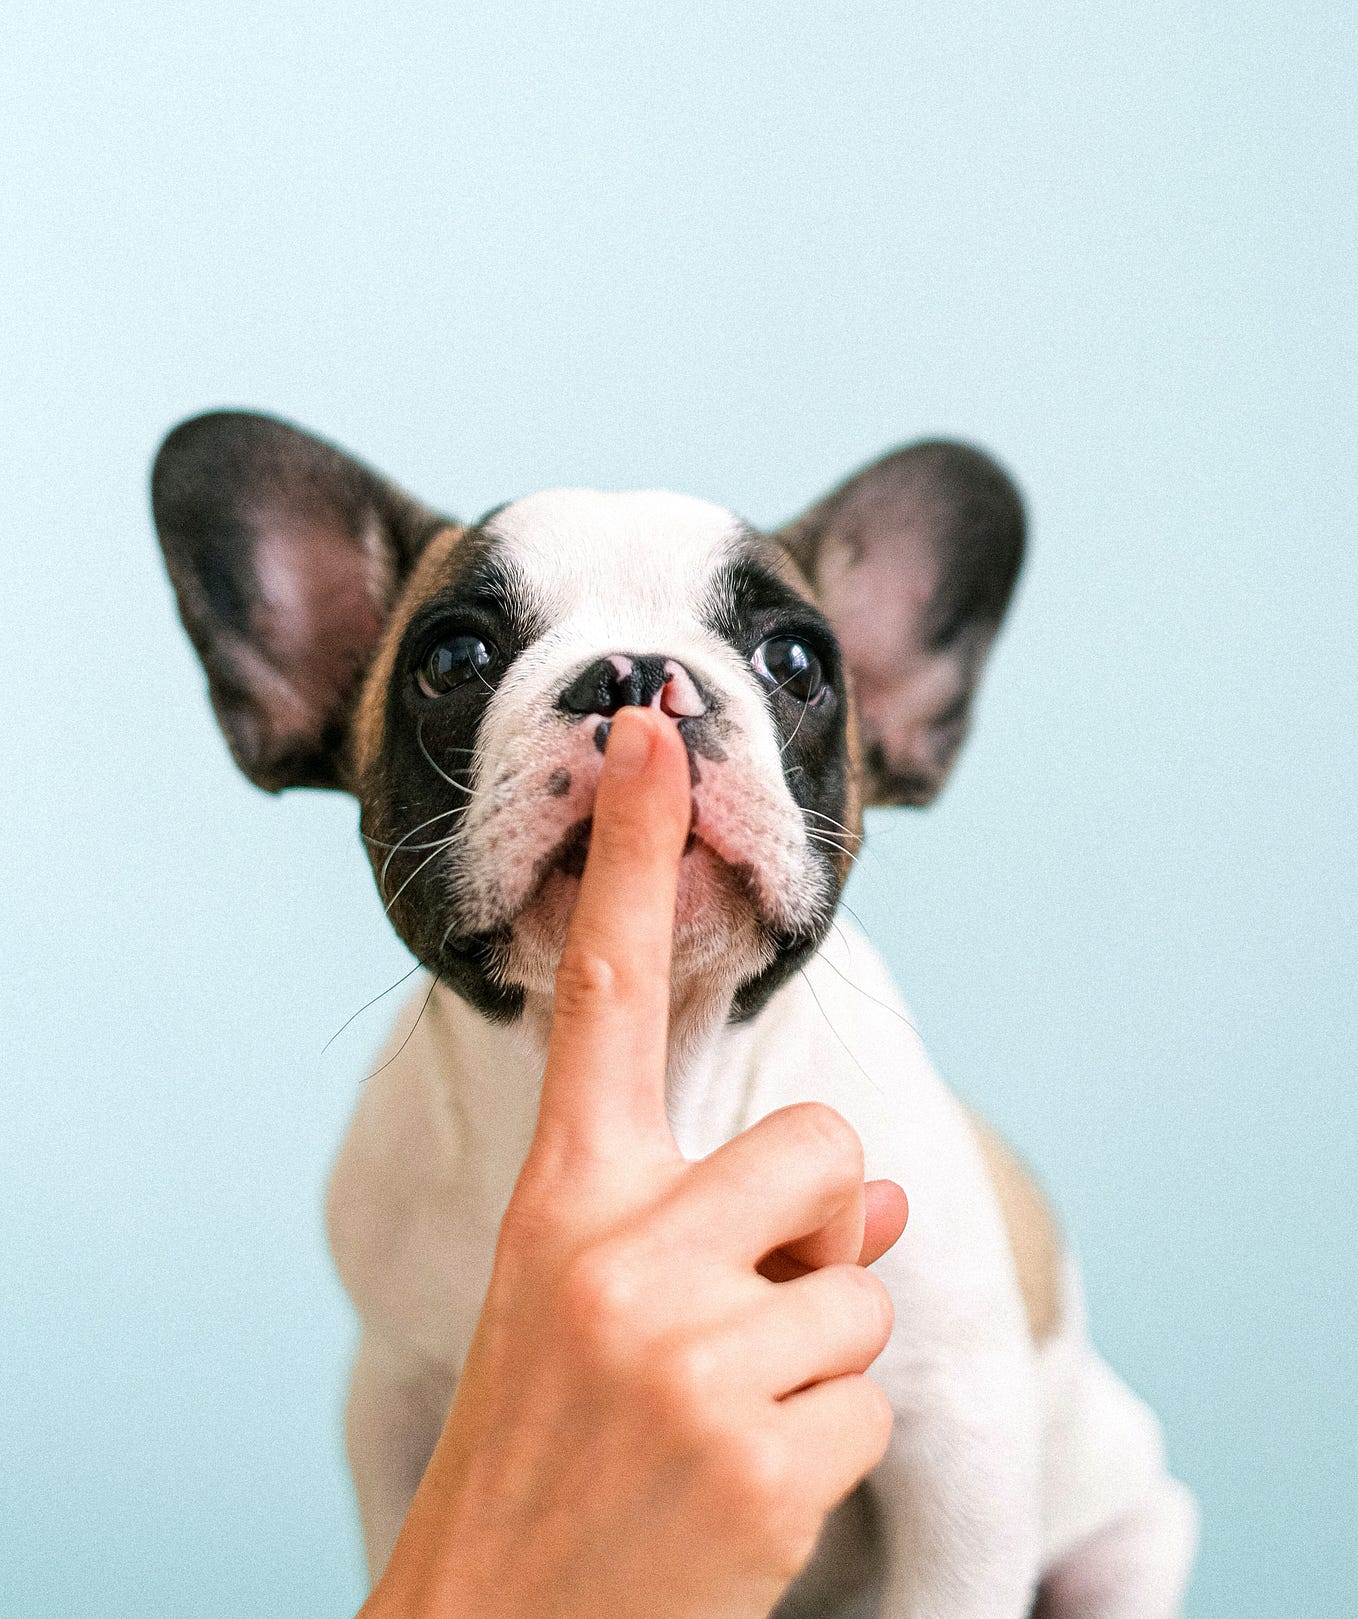 White and black French Bulldog with human’s index finger on its snout encouraging the dog to be quiet.